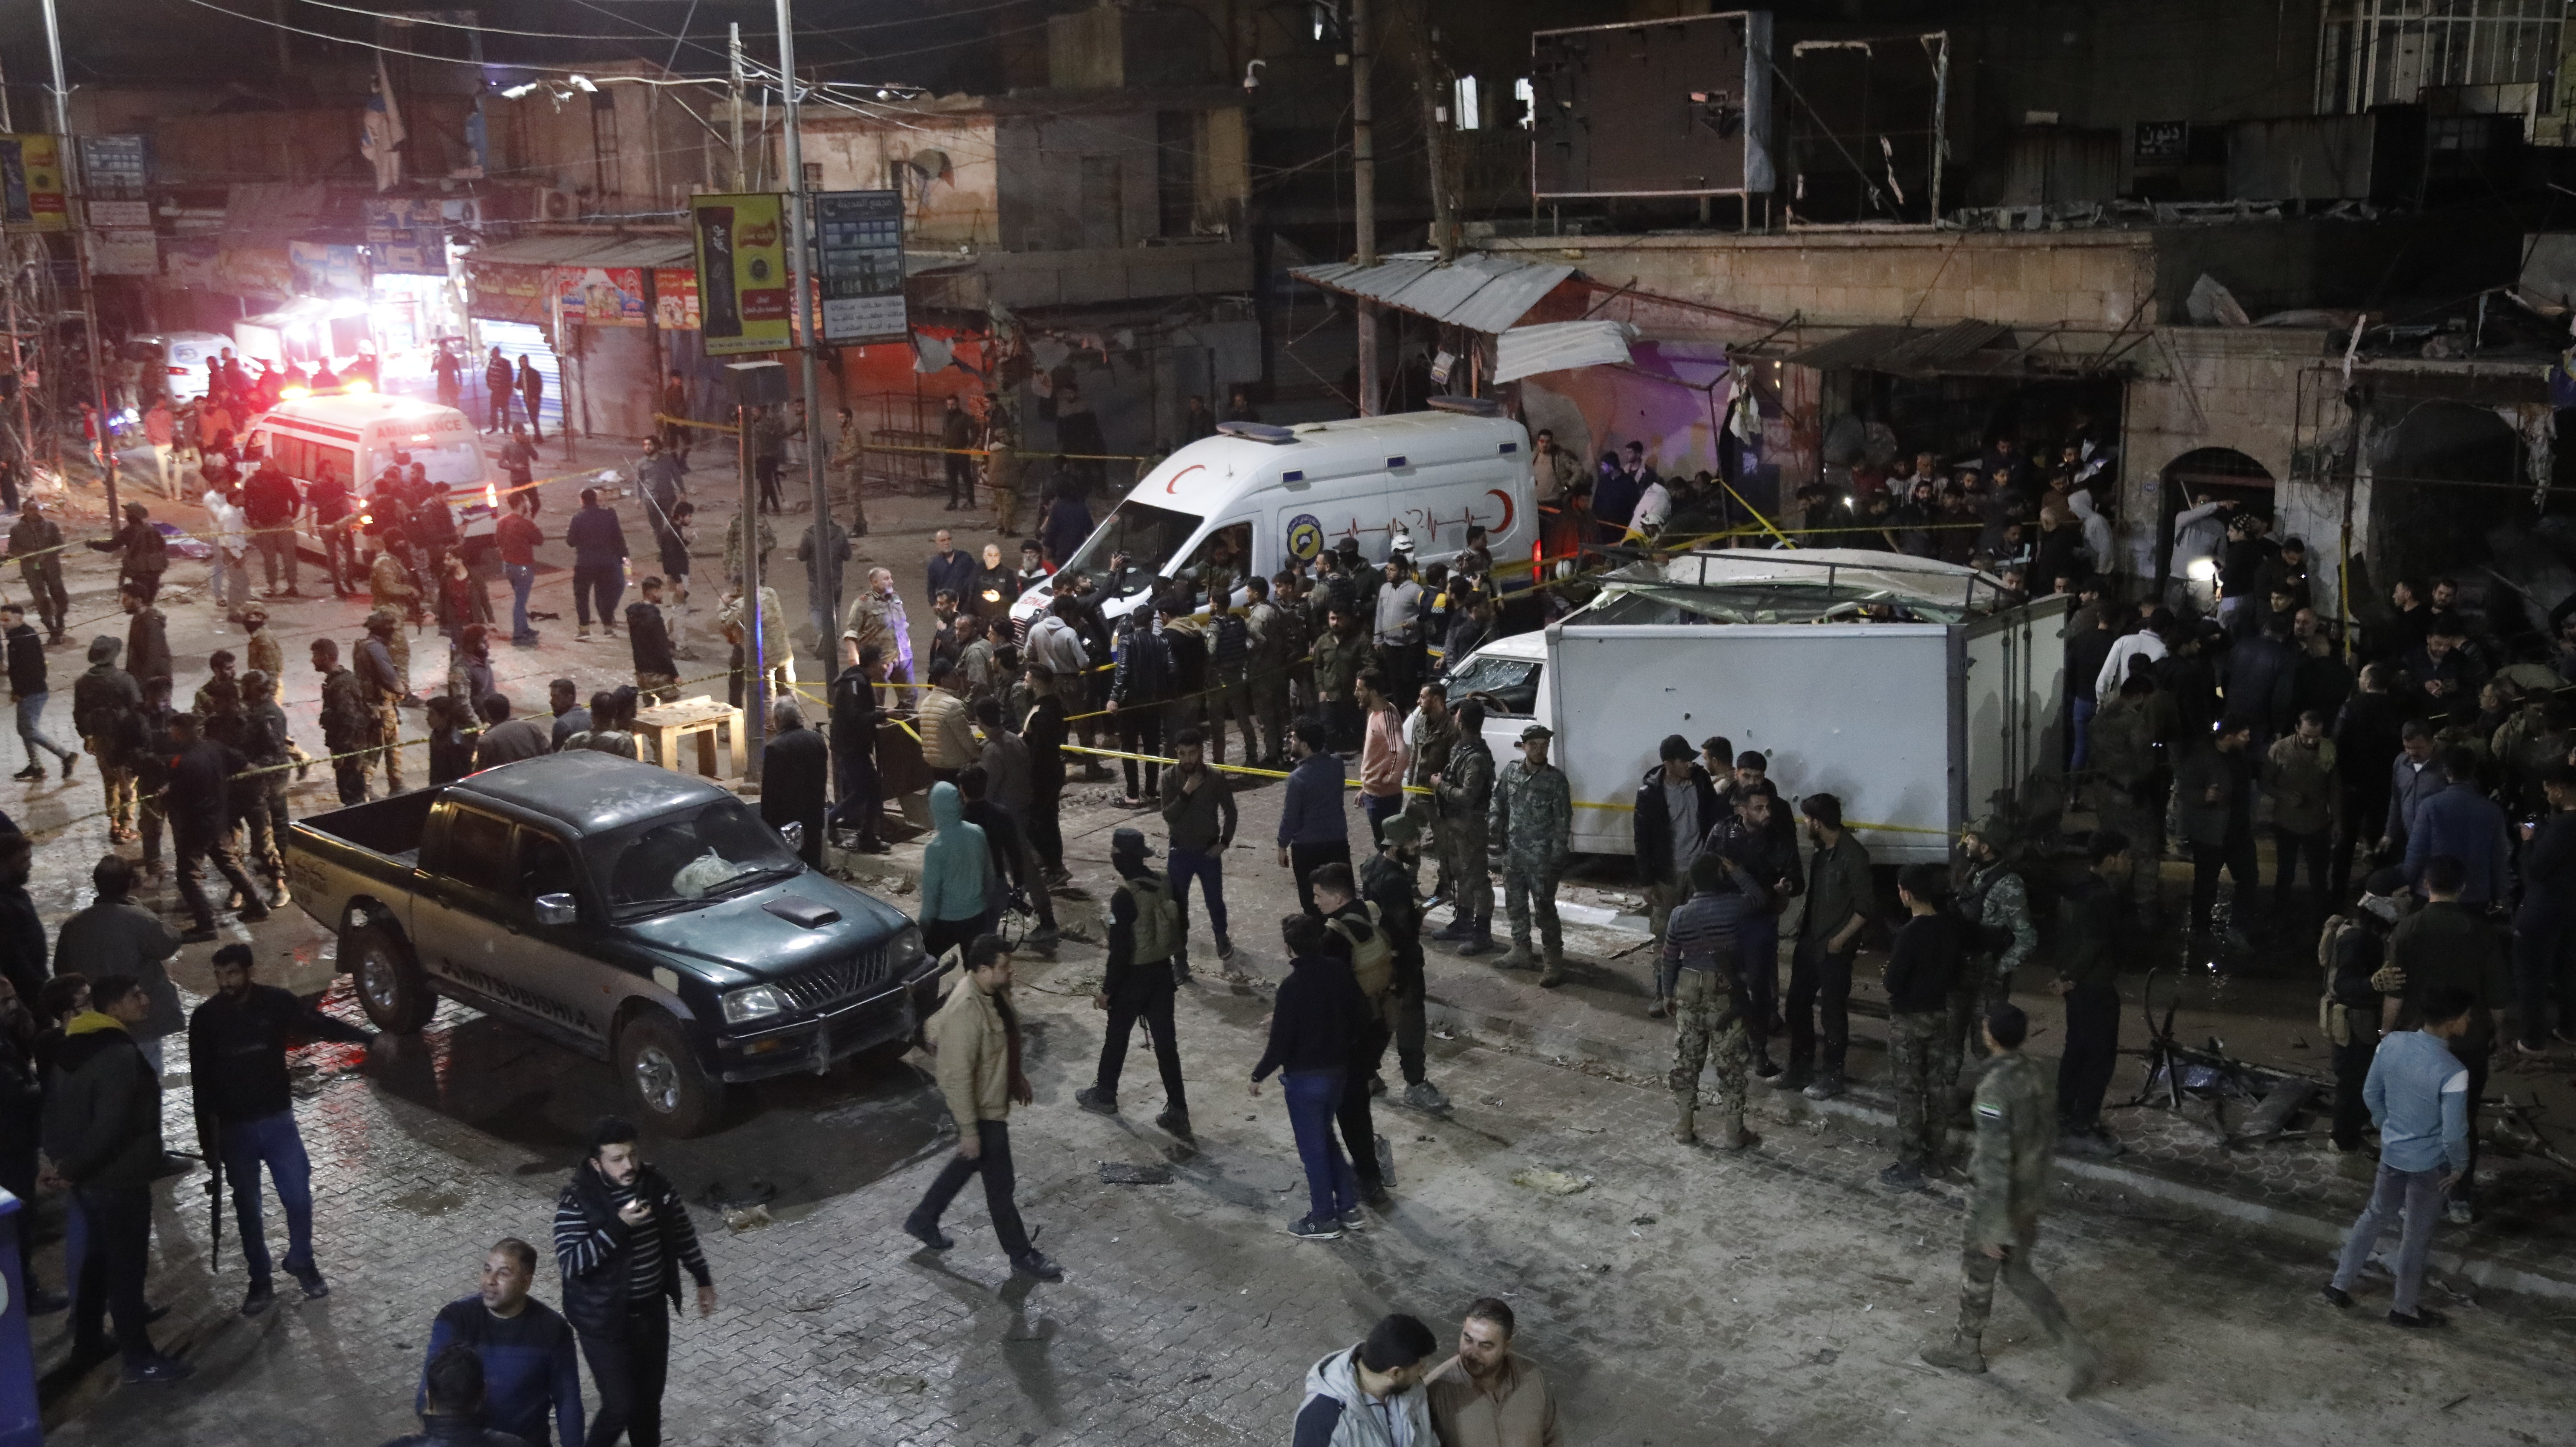 Security forces and ambulances are dispatched to the area after a bomb exploded in bustling market in area controlled by opposition forces in Azaz, Syria